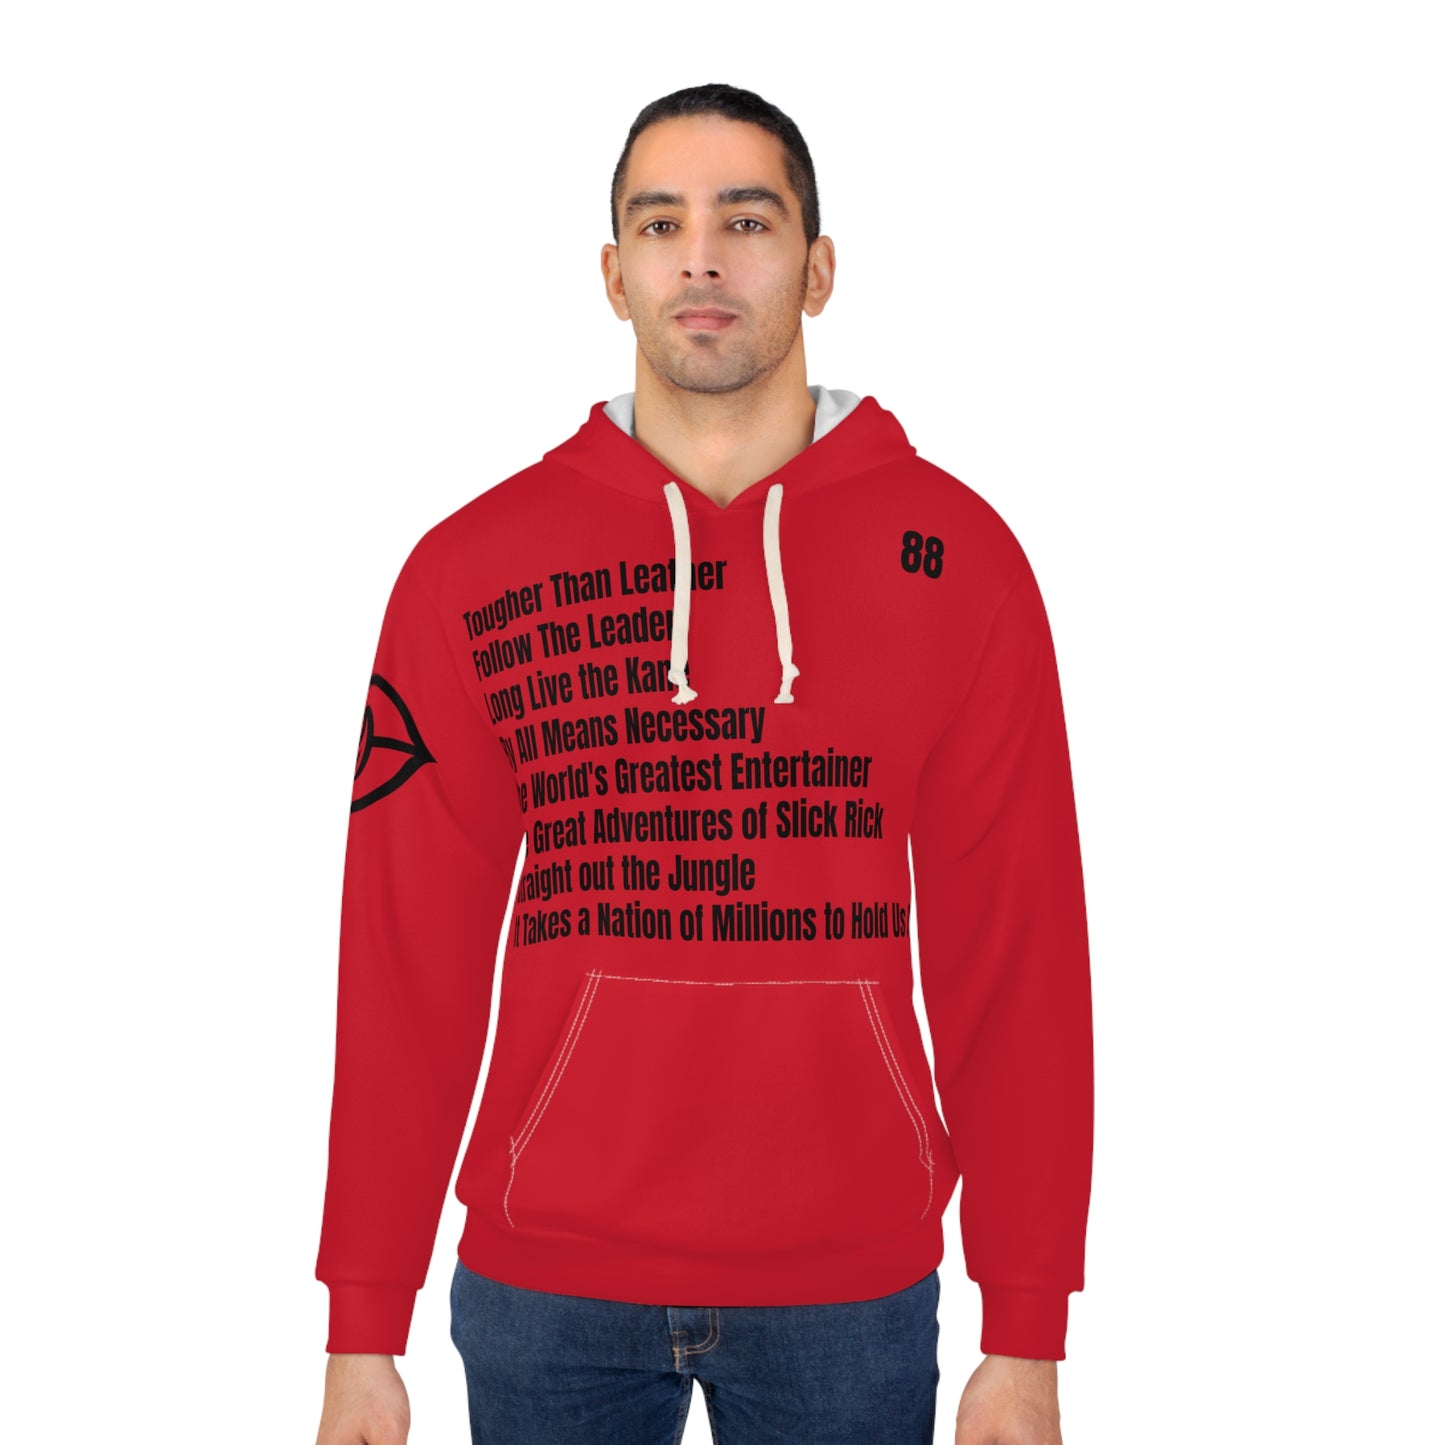 Limited Edition 1988 Golden Era Hip Hop Years Collectable Unisex Pullover Hoodie ( 1 of 20 )